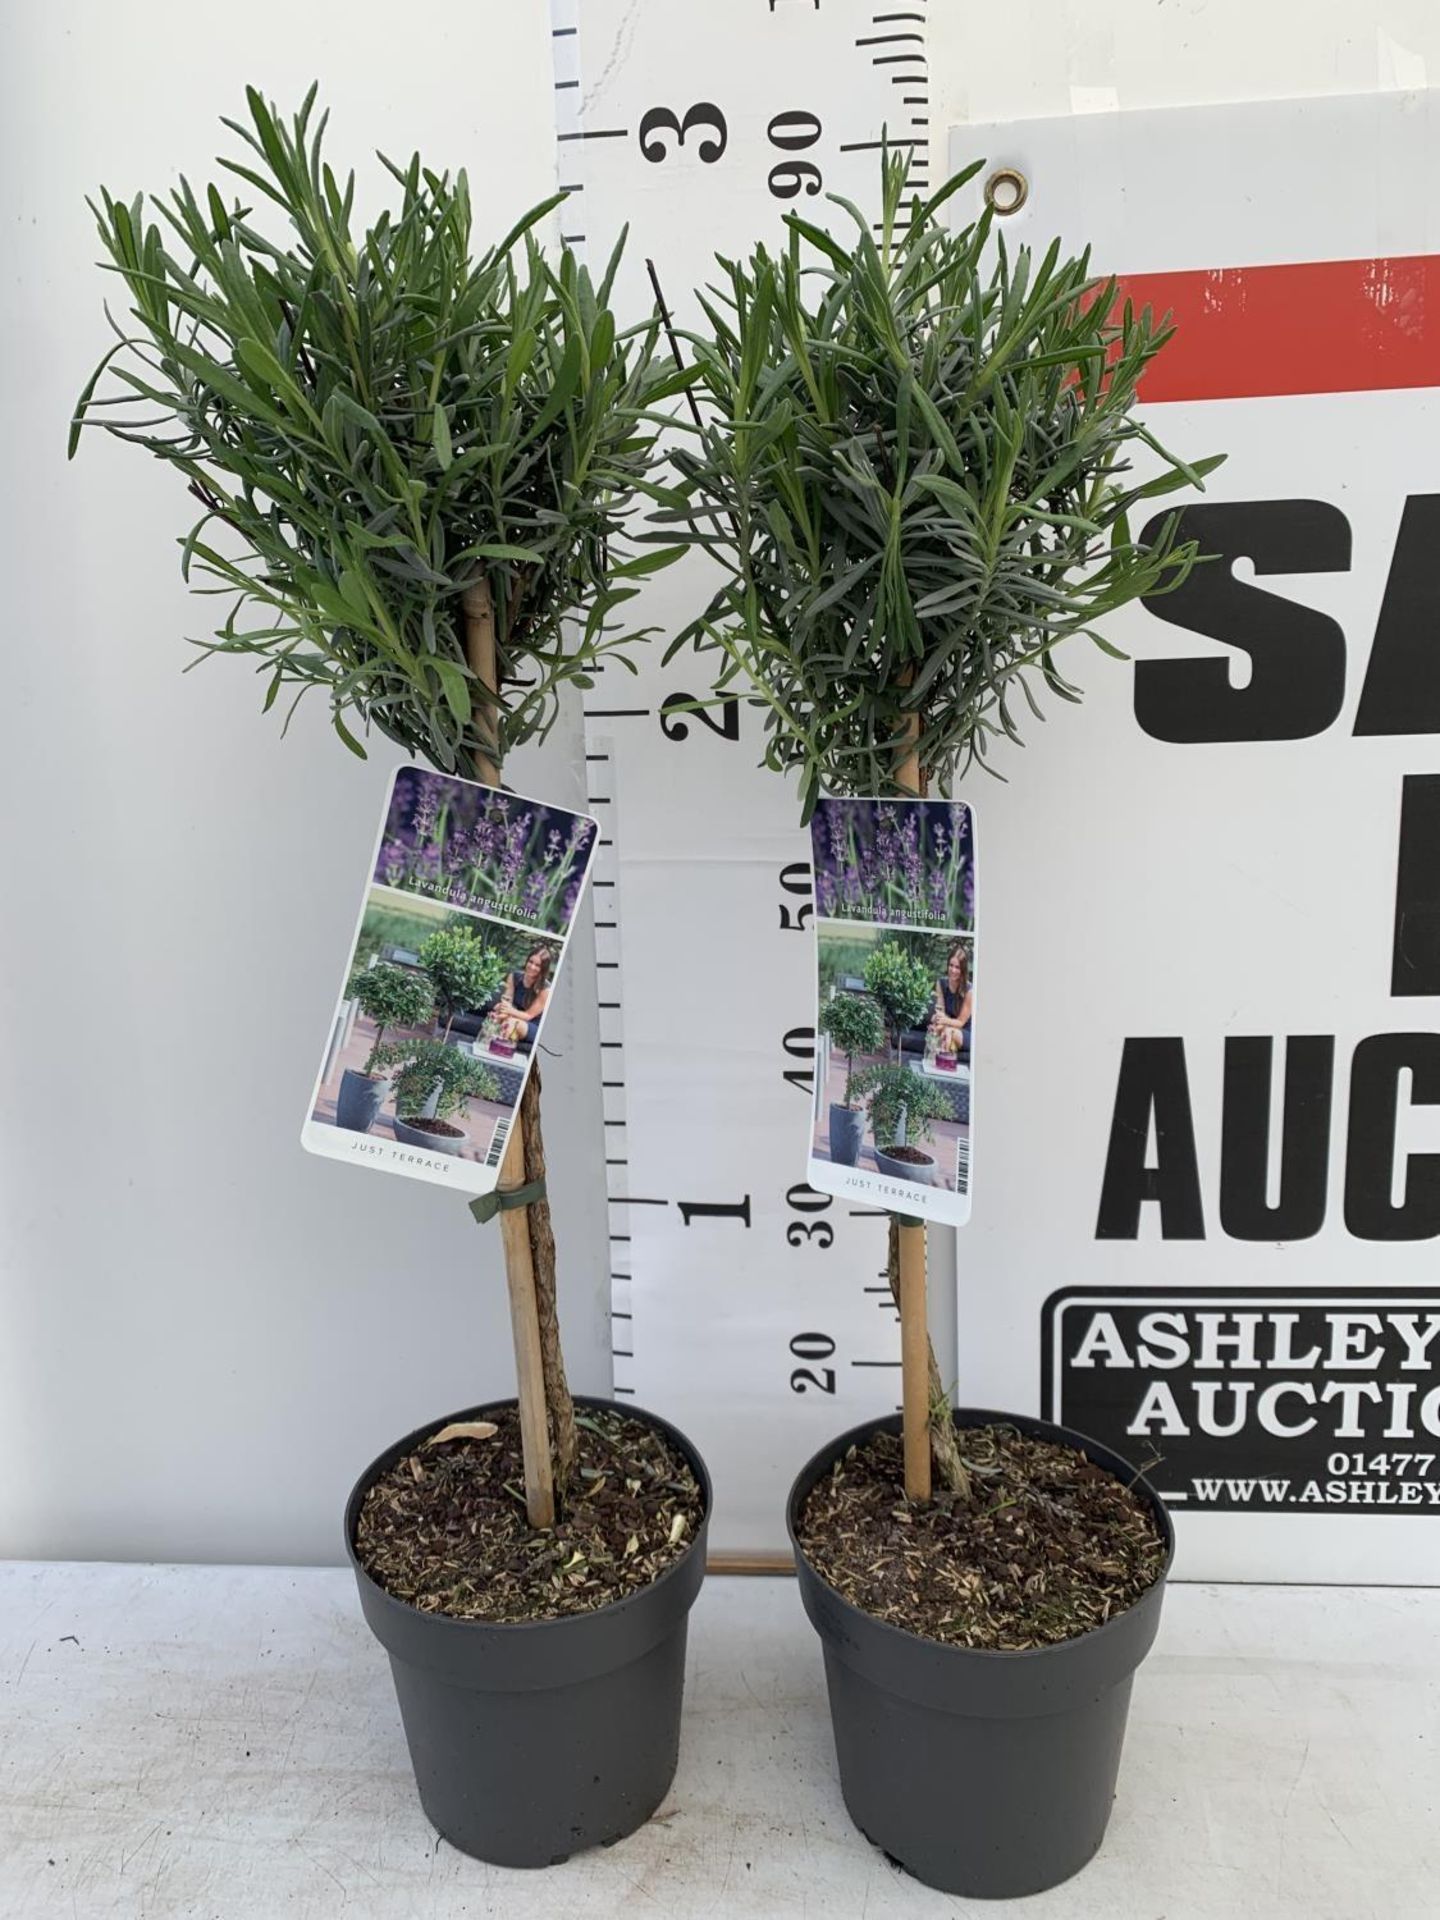 TWO STANDARD LAVANDER PLANTS IN 3 LTR POTS 80CM TALL PLUS VAT TO BE SOLD FOR THE TWO - Image 2 of 10